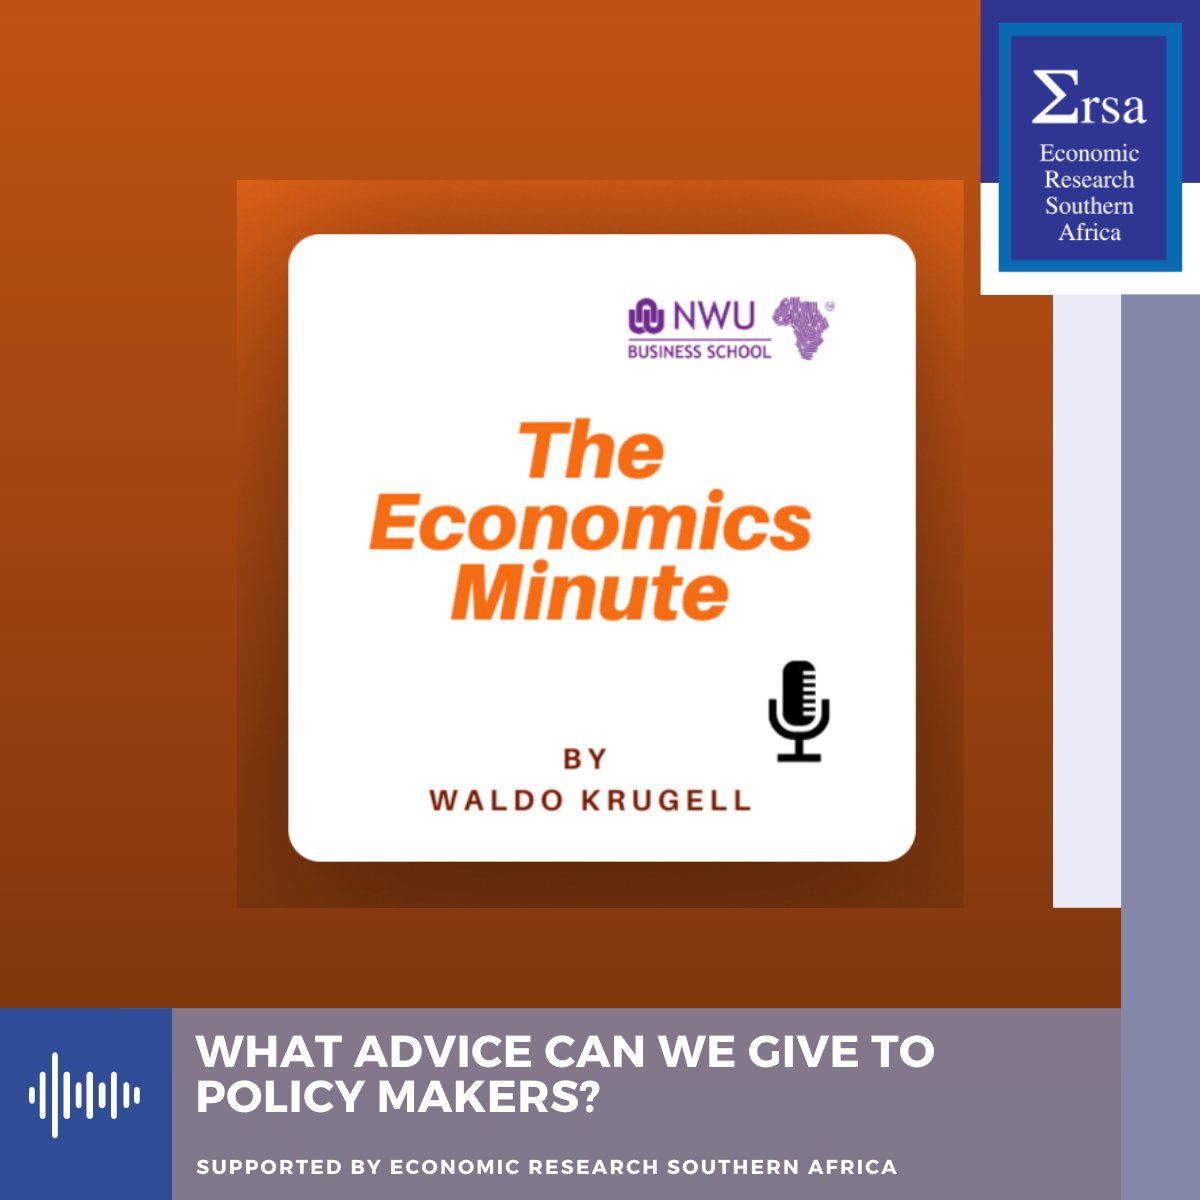 As we continue to encourage economic discussions, we support ‘The Economics Minute’ by @WaldoKrugell. With much microeconomic evidence-based information available, how different is policy advice for micro and macro policy makers? Listen: open.spotify.com/episode/3HD8Jw… #PodcastAndChill